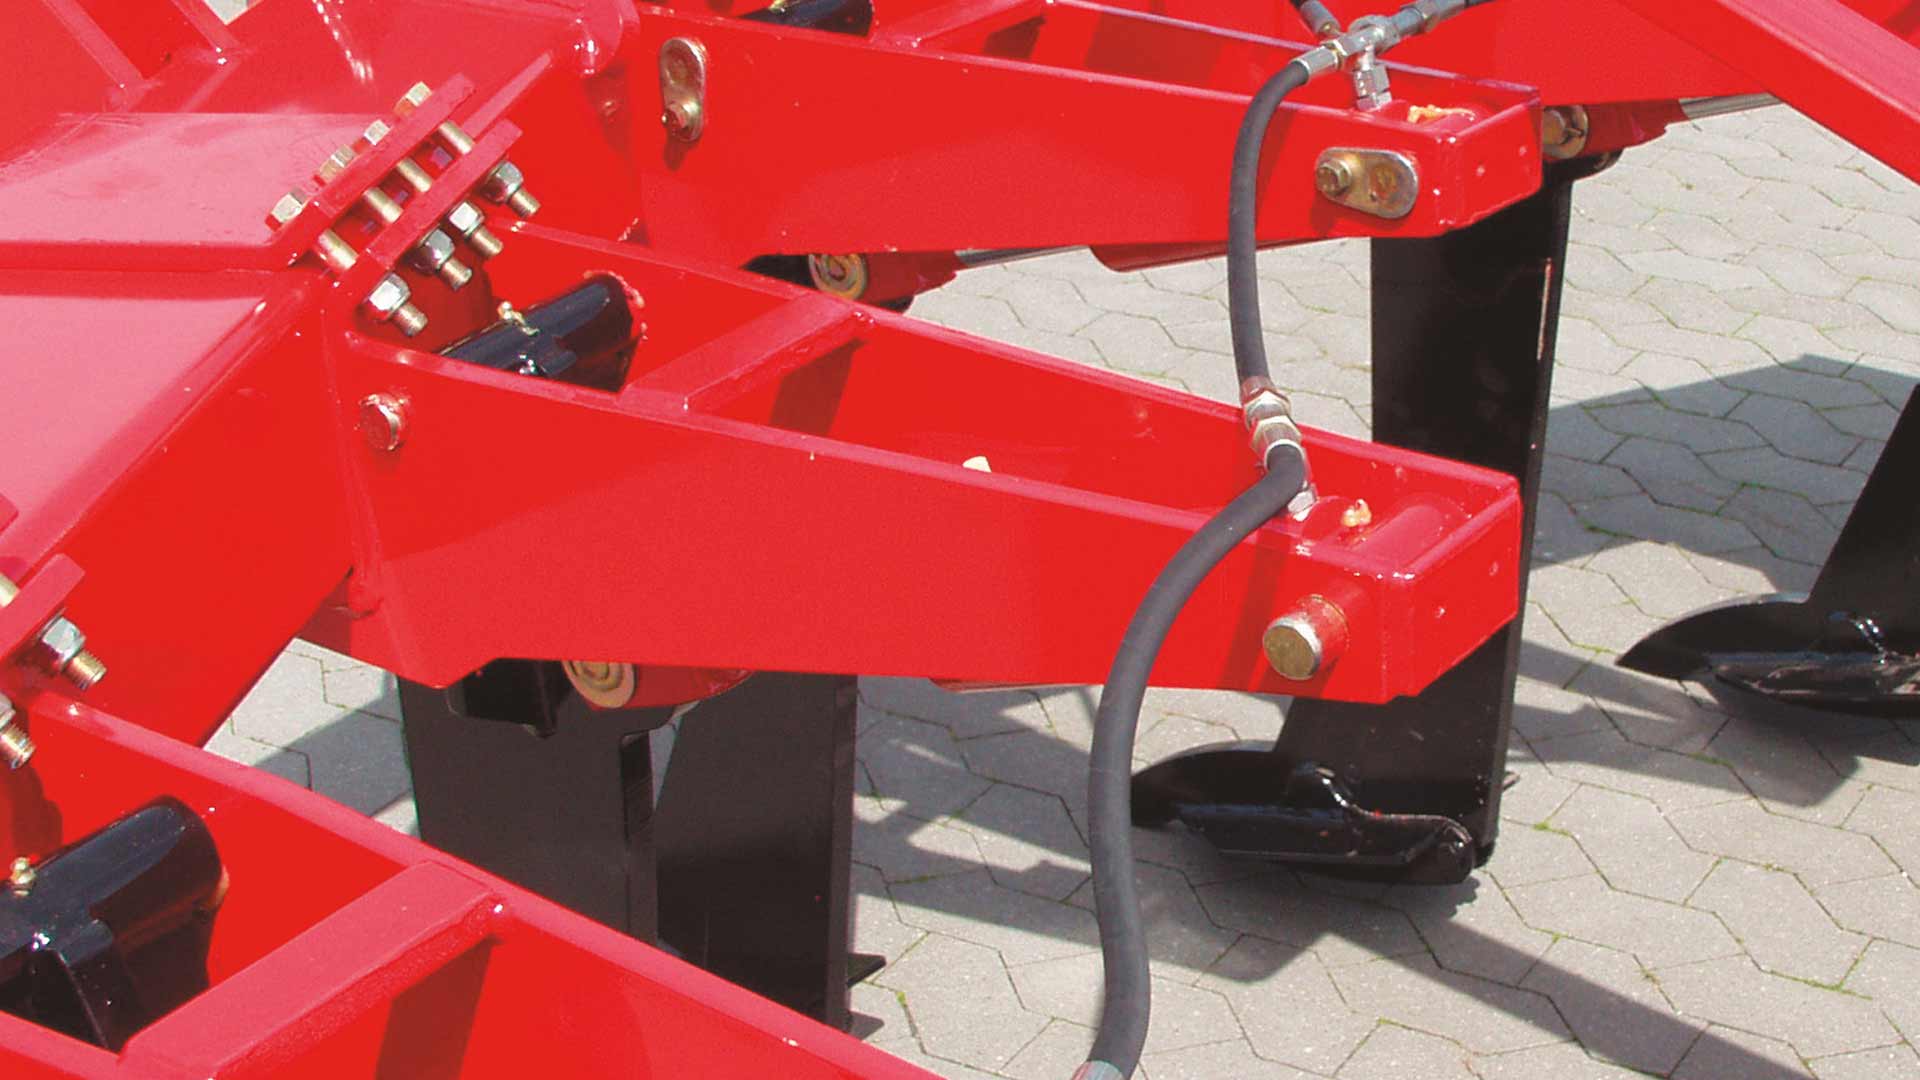 When dealing with stony soil types, the hydraulic stone protection system is the best choice. A cylinder on each tine ensures that the tines automatically swing upwards when hitting a rock.